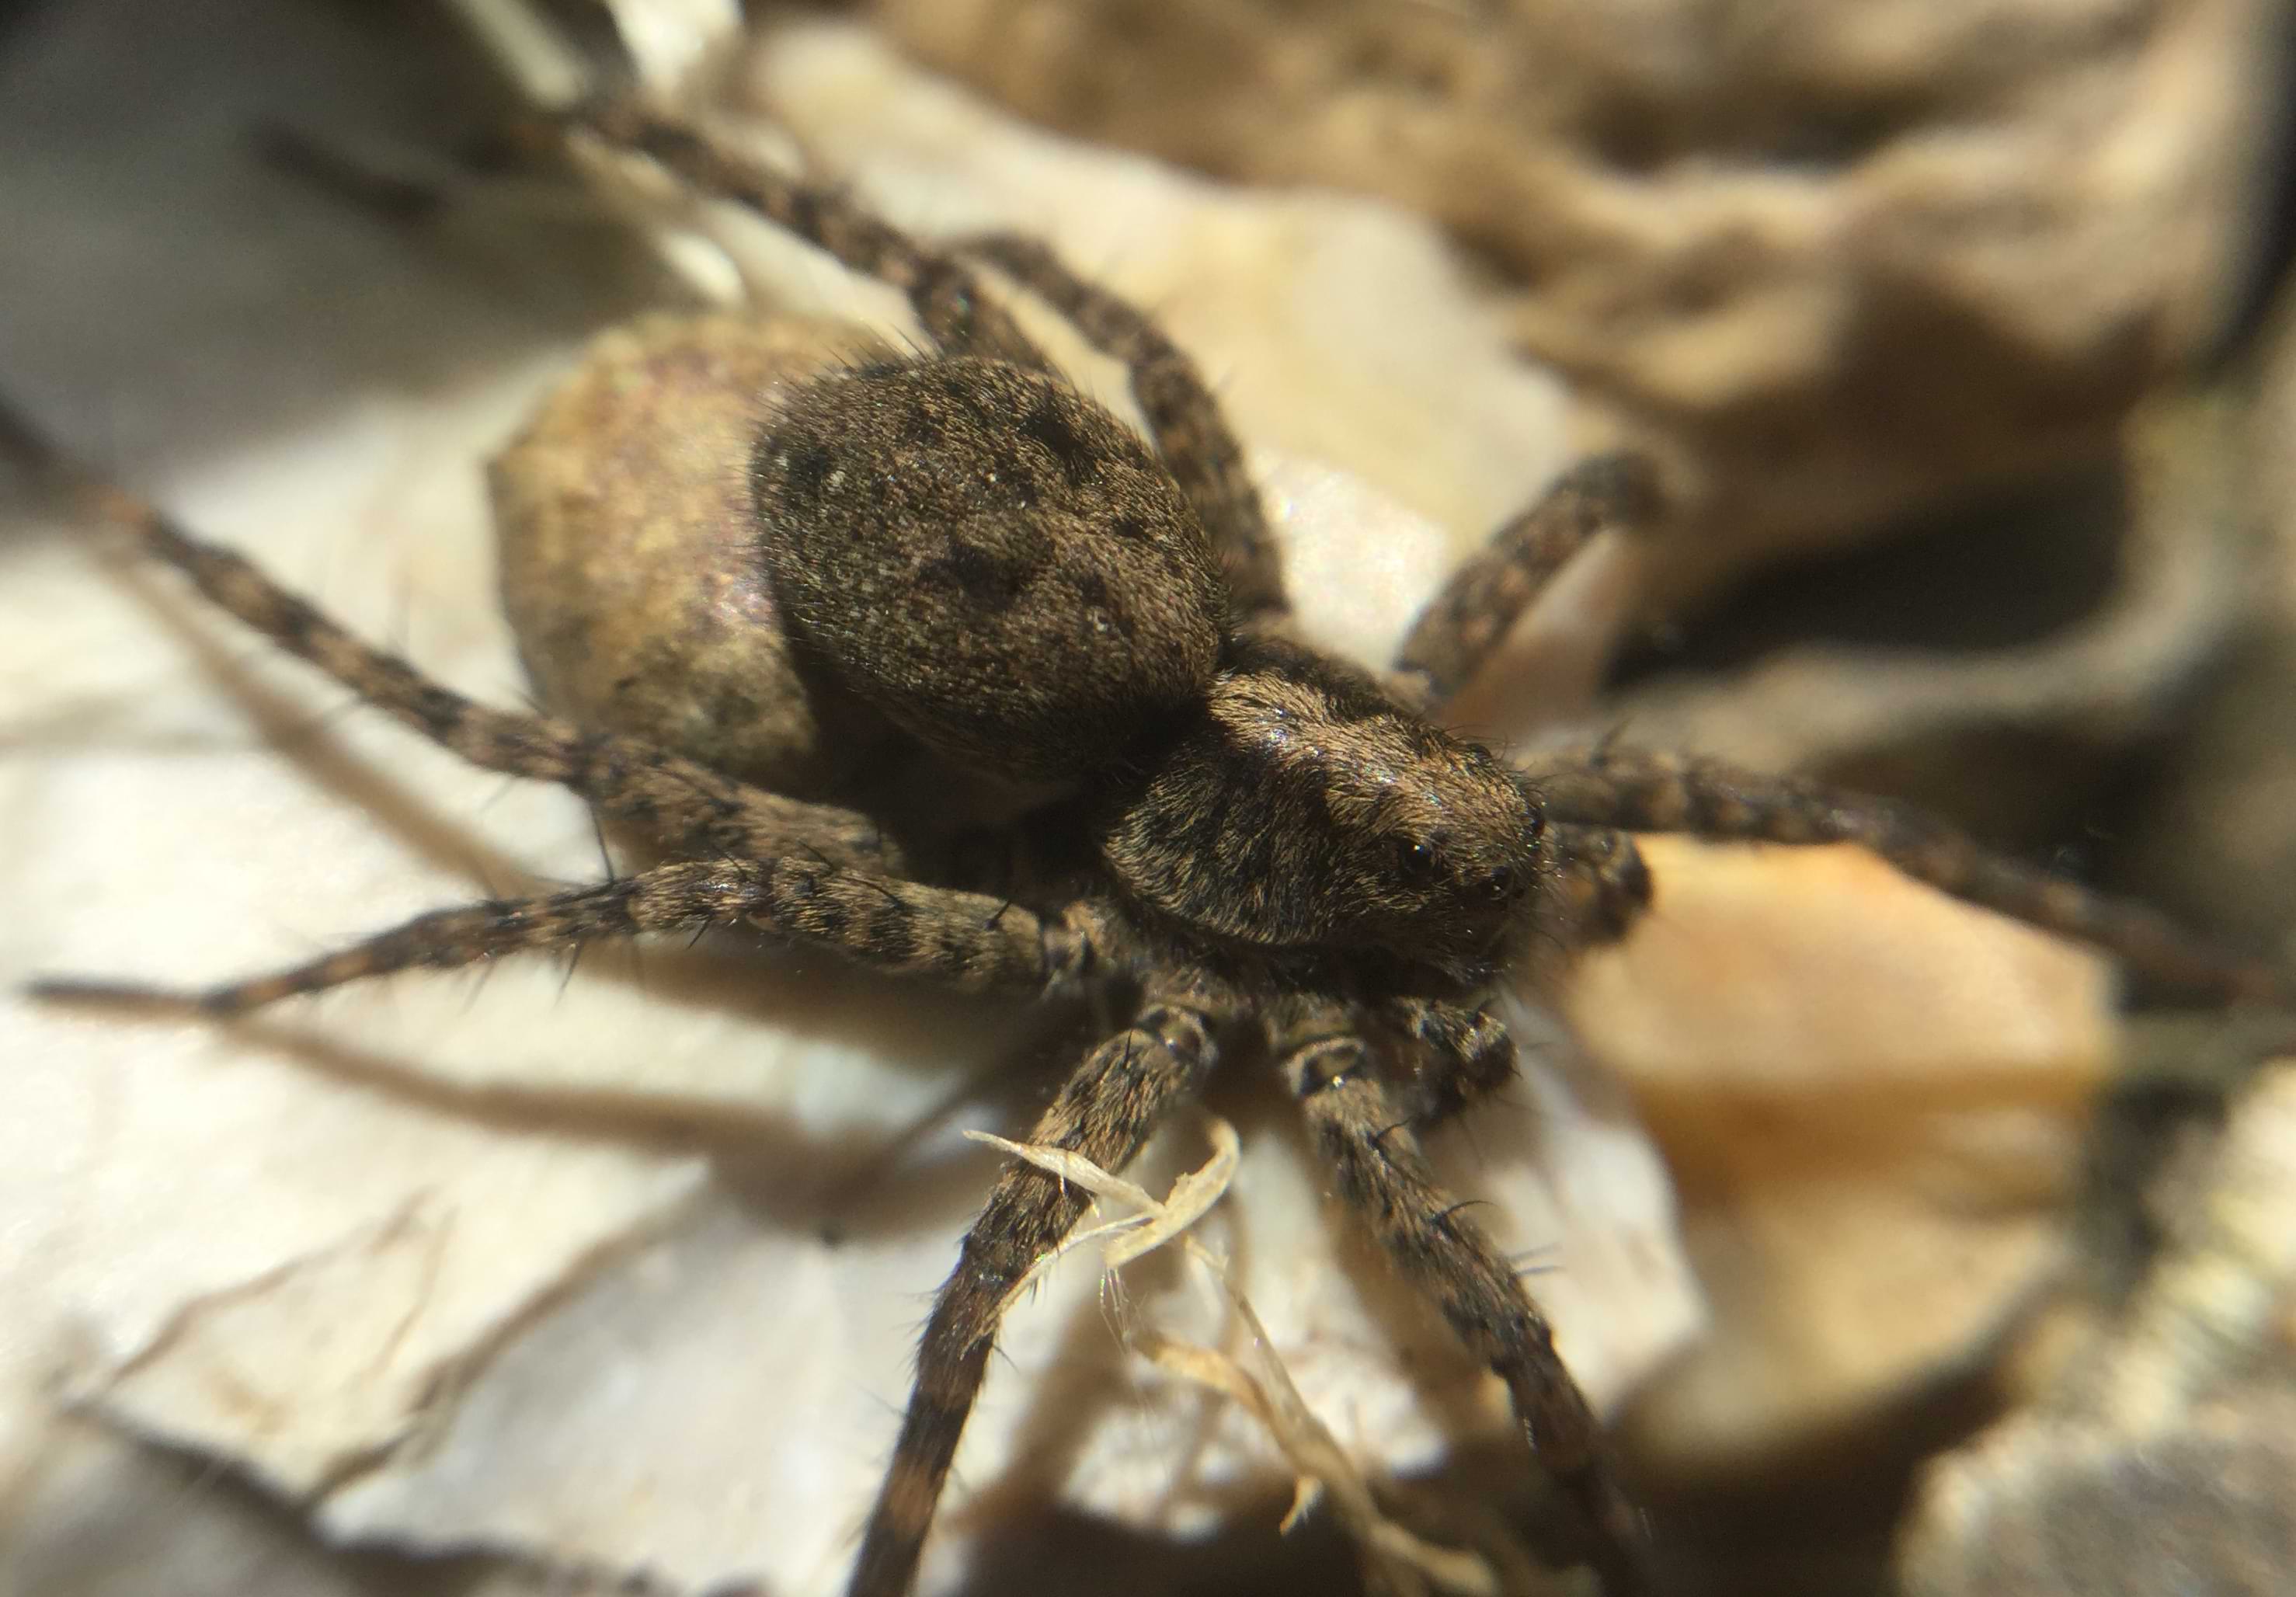 Close up photo of a large, light-brown spider. It has two big eyes on the side of its head, another two big eyes looking forward, and four smaller eyes positioned underneath those. The spider's legs and palps have lots of long thick spines on them.